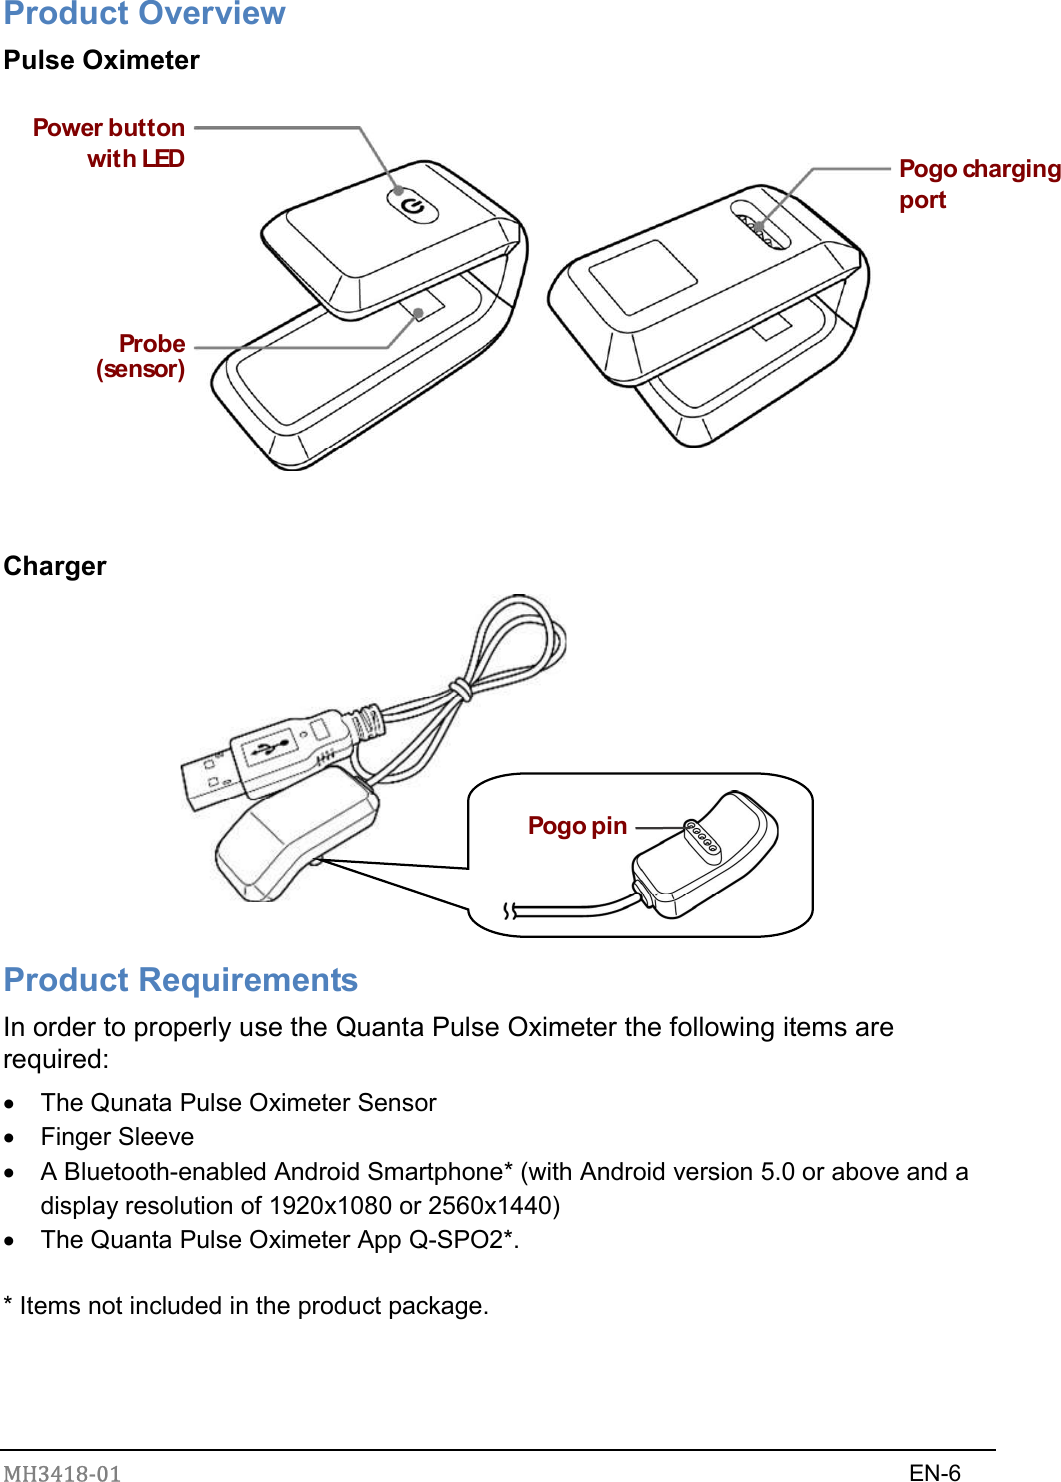 MH3418-01                                                                    EN-6   Product Overview Pulse Oximeter  Power buttonwith LEDProbe(sensor)Pogo charging port   Charger   Pogo pin Product Requirements In order to properly use the Quanta Pulse Oximeter the following items are required:   The Qunata Pulse Oximeter Sensor       Finger Sleeve   A Bluetooth-enabled Android Smartphone* (with Android version 5.0 or above and a display resolution of 1920x1080 or 2560x1440)   The Quanta Pulse Oximeter App Q-SPO2*.  * Items not included in the product package.  